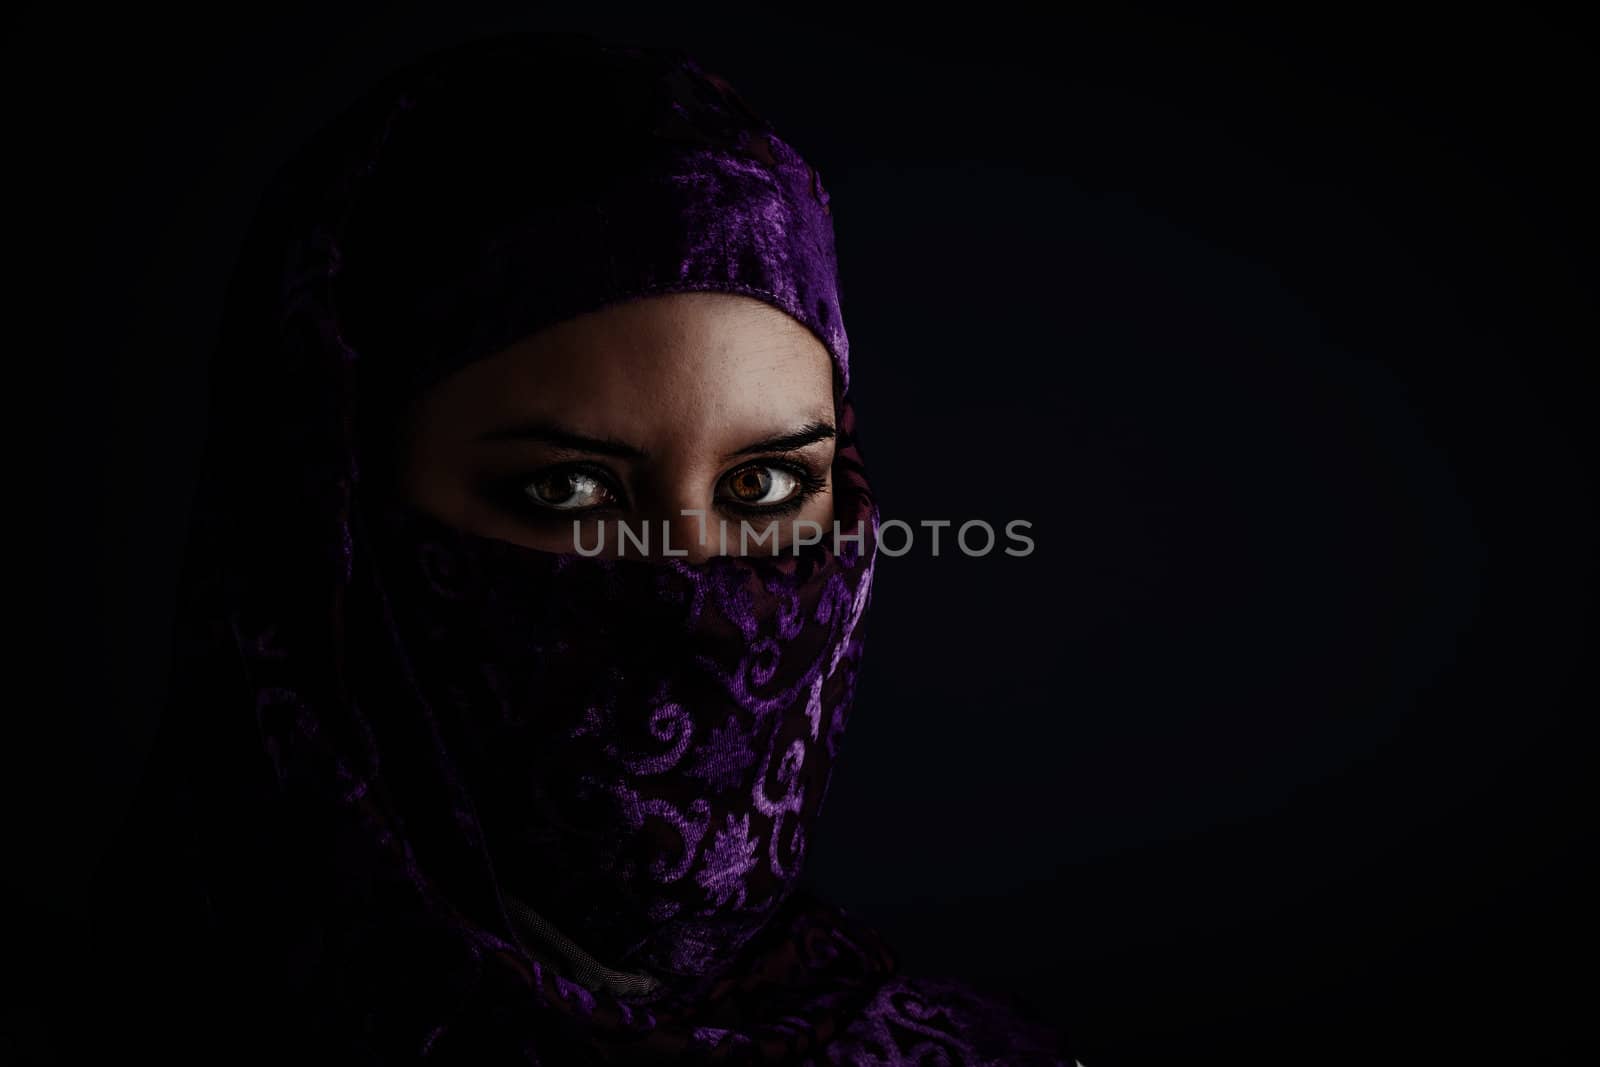 Arab women with traditional veil, eyes intense, mystical beauty